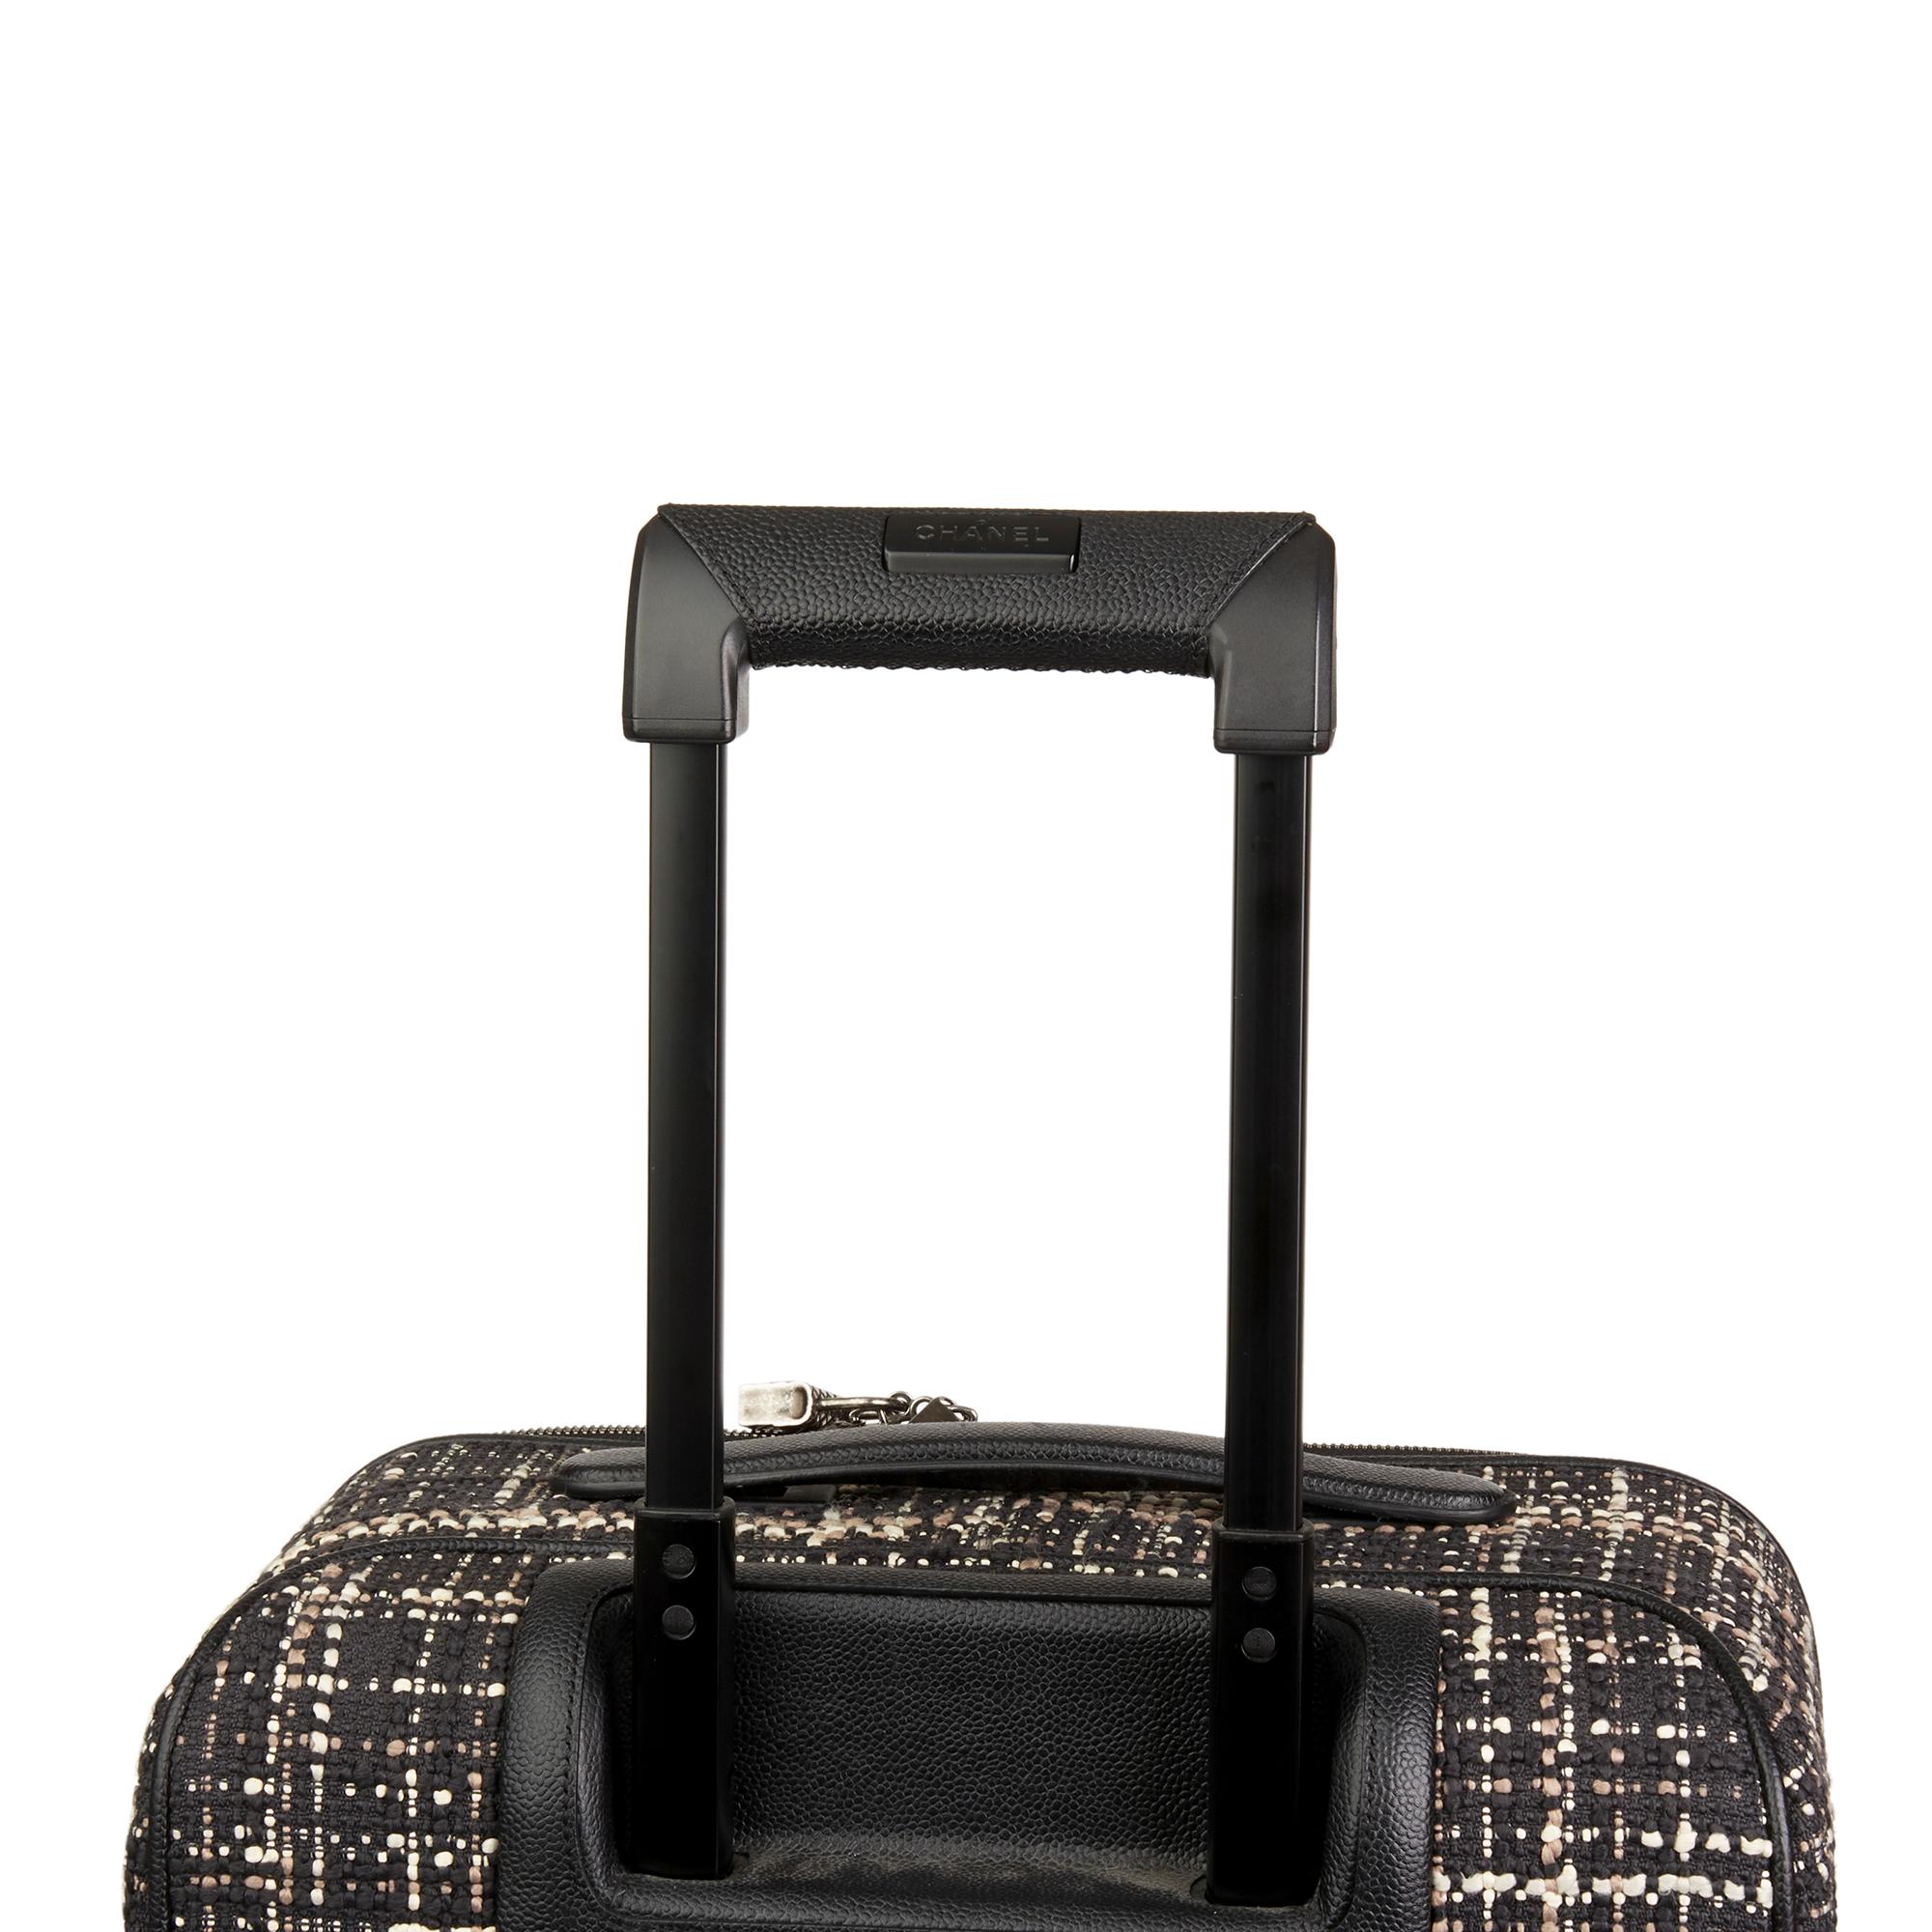 2016 Chanel Black Tweed & Caviar Leather Jacket Trolley Rolling Suitcase 2